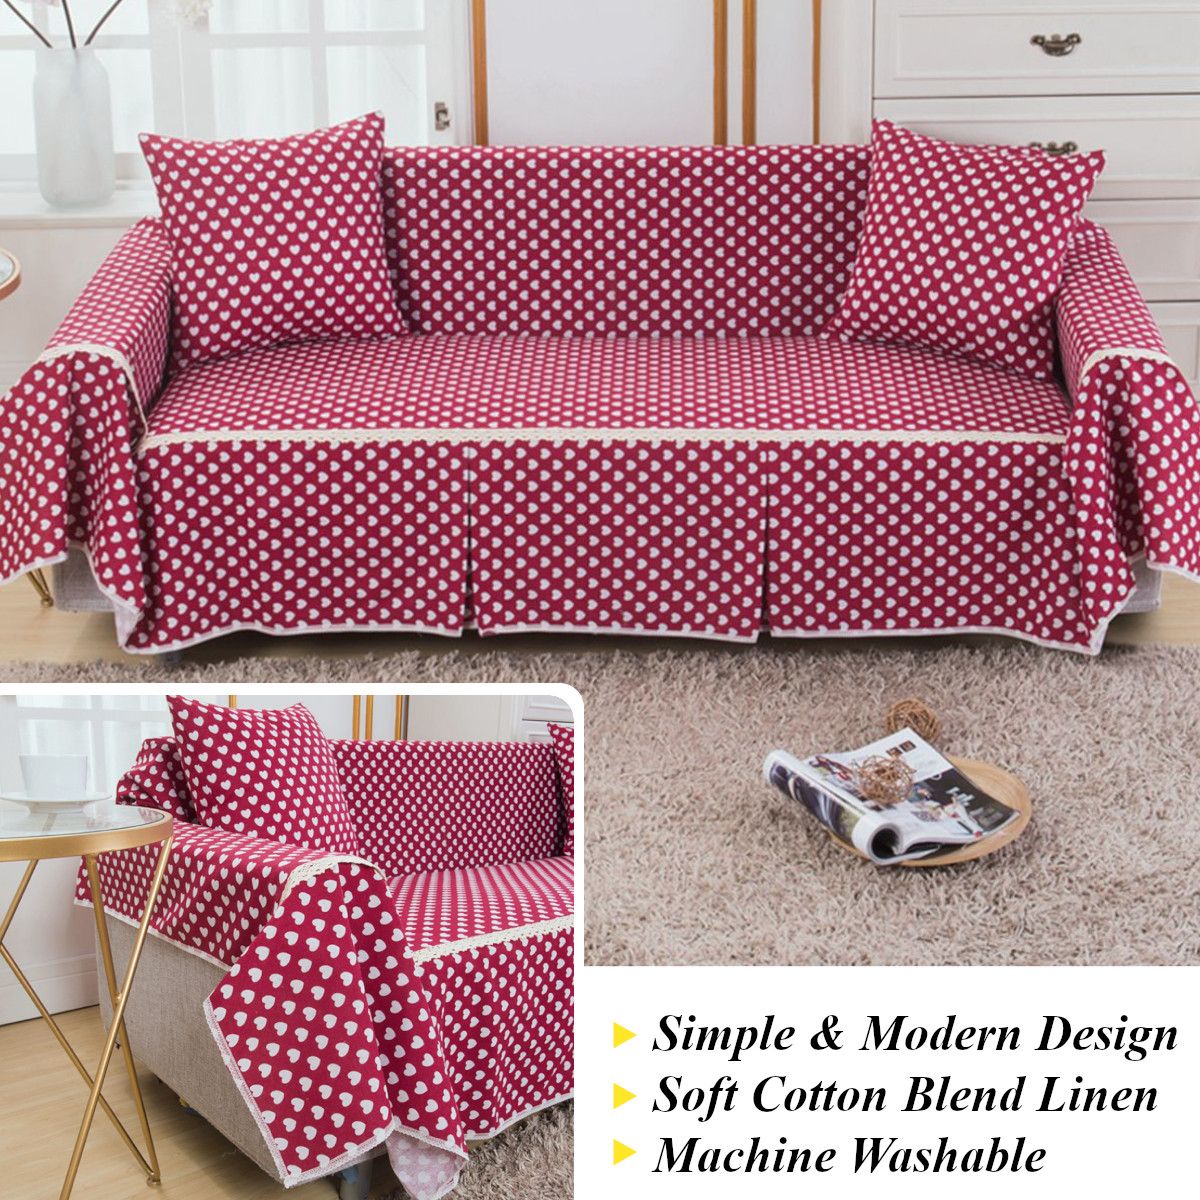 Sofa-Seat-Covers-Couch-Slipcover-Cotton-Blend-1-4-Seat-Pet-Dog-Sofa-Cover-Protector-1454797